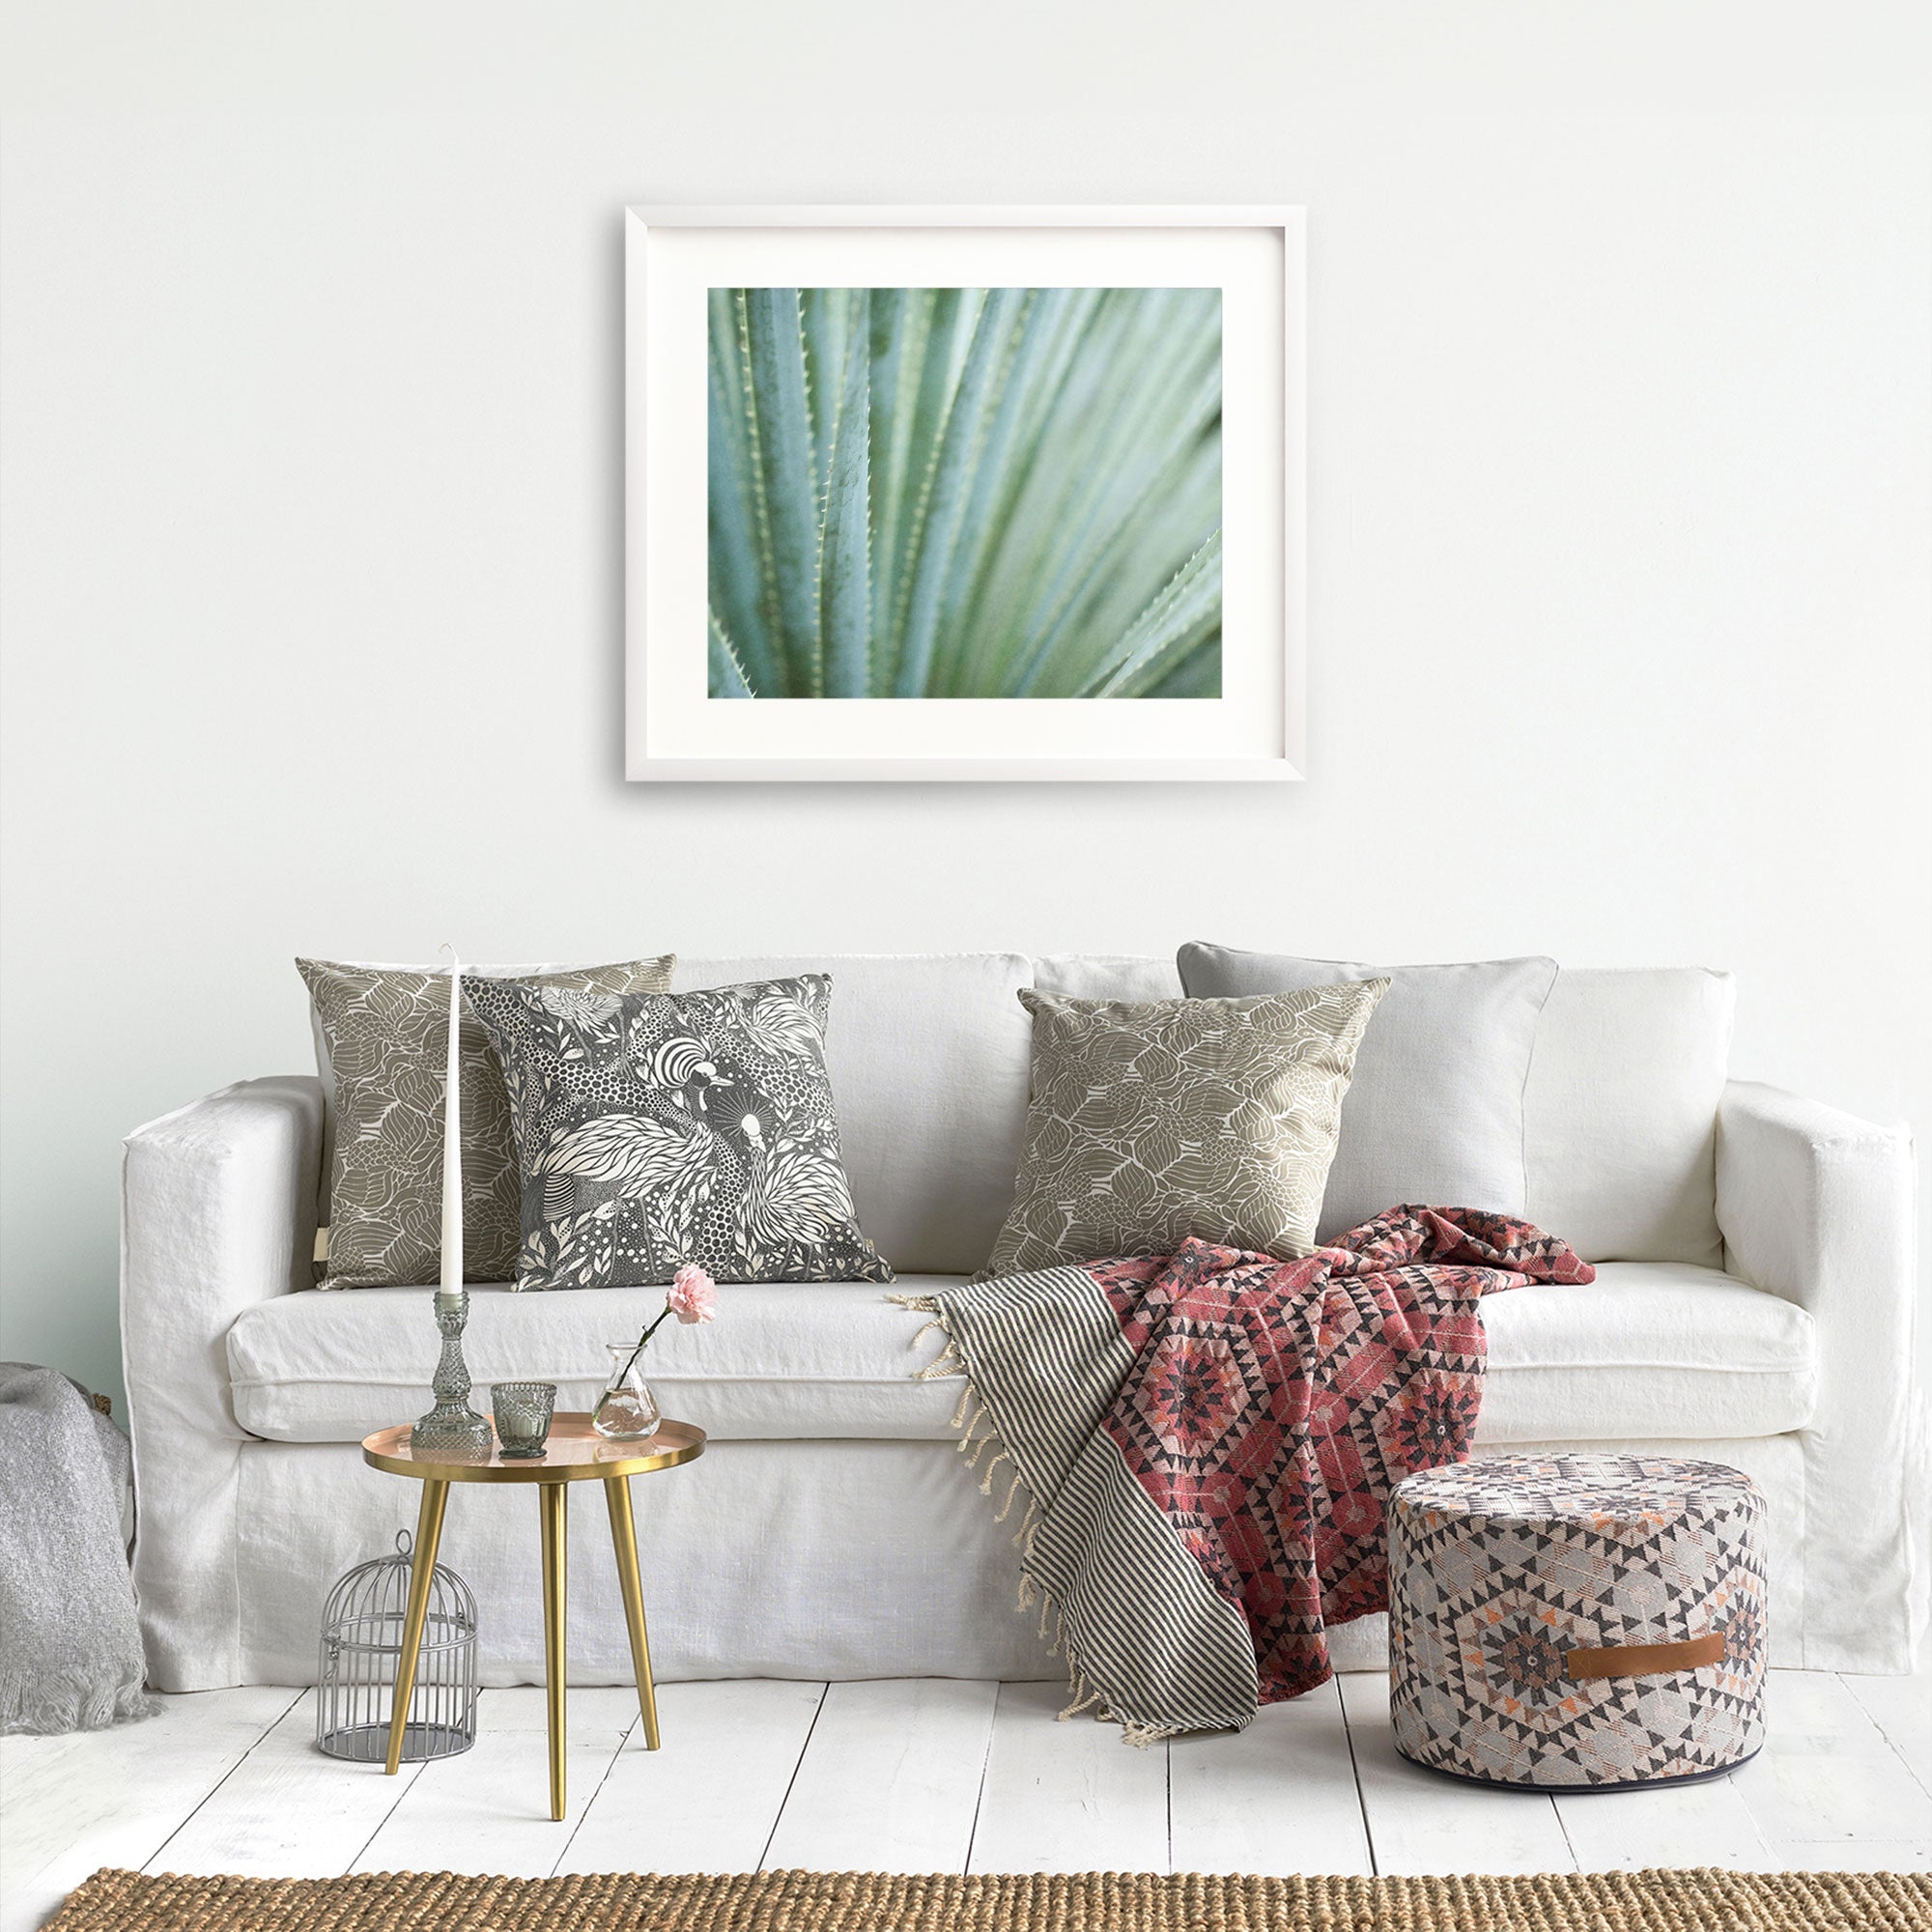 A cozy living room with a white sofa adorned with decorative pillows, a red patterned throw, a small round gold table with a vase and books, a pouf, and Offley Green&#39;s &#39;Strands and Spikes&#39; Abstract Green Botanical Print.